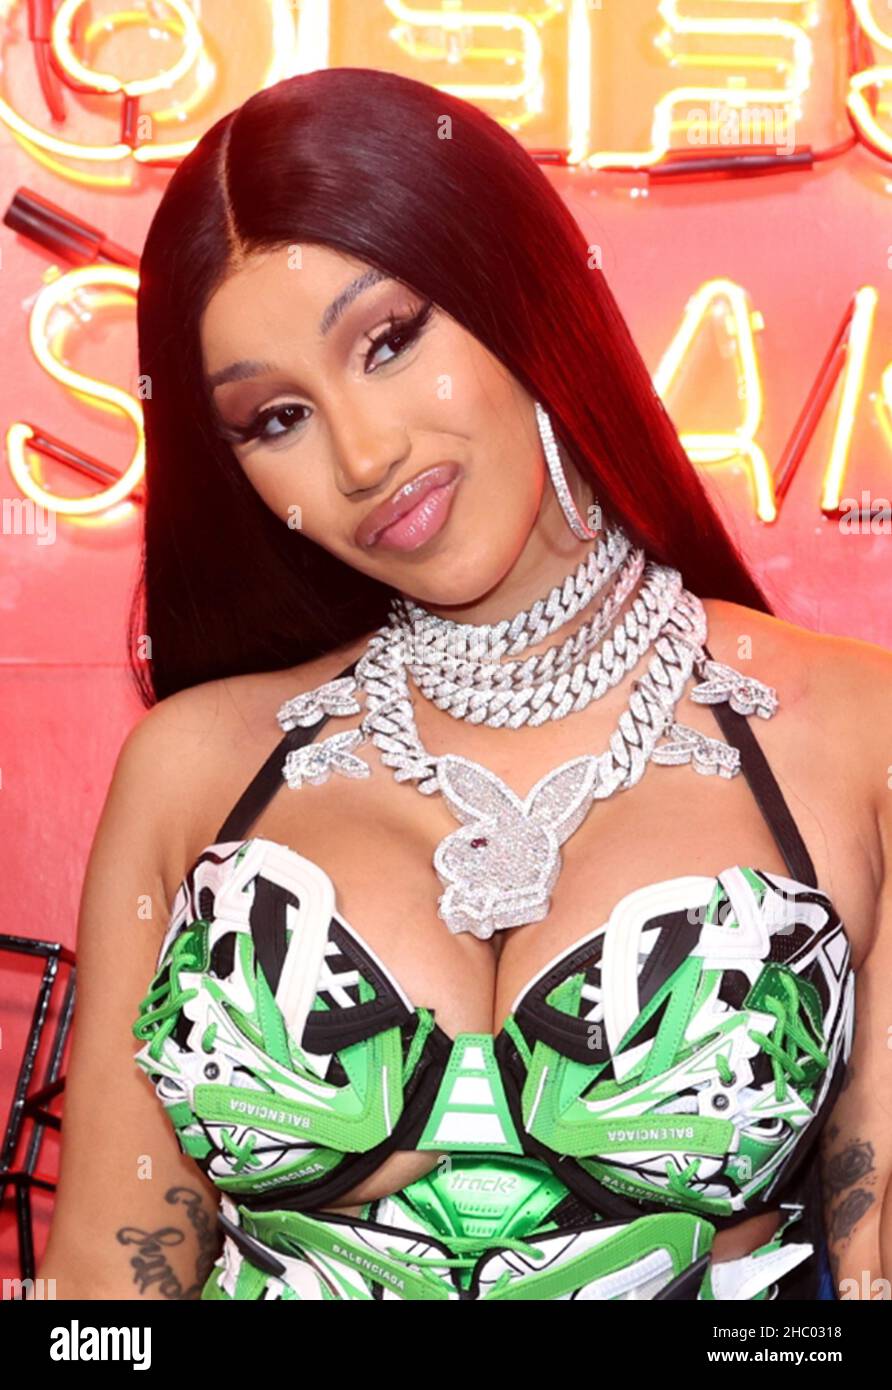 Los Angeles, Ca. 21st Dec, 2021. Cardi B at Offset's 30th Birthday Party hosted by Cardi B at Sneakertopia LA in Los Angeles, California on December 21, 2021. Credit: Walik Goshorn/Media Punch/Alamy Live News Stock Photo